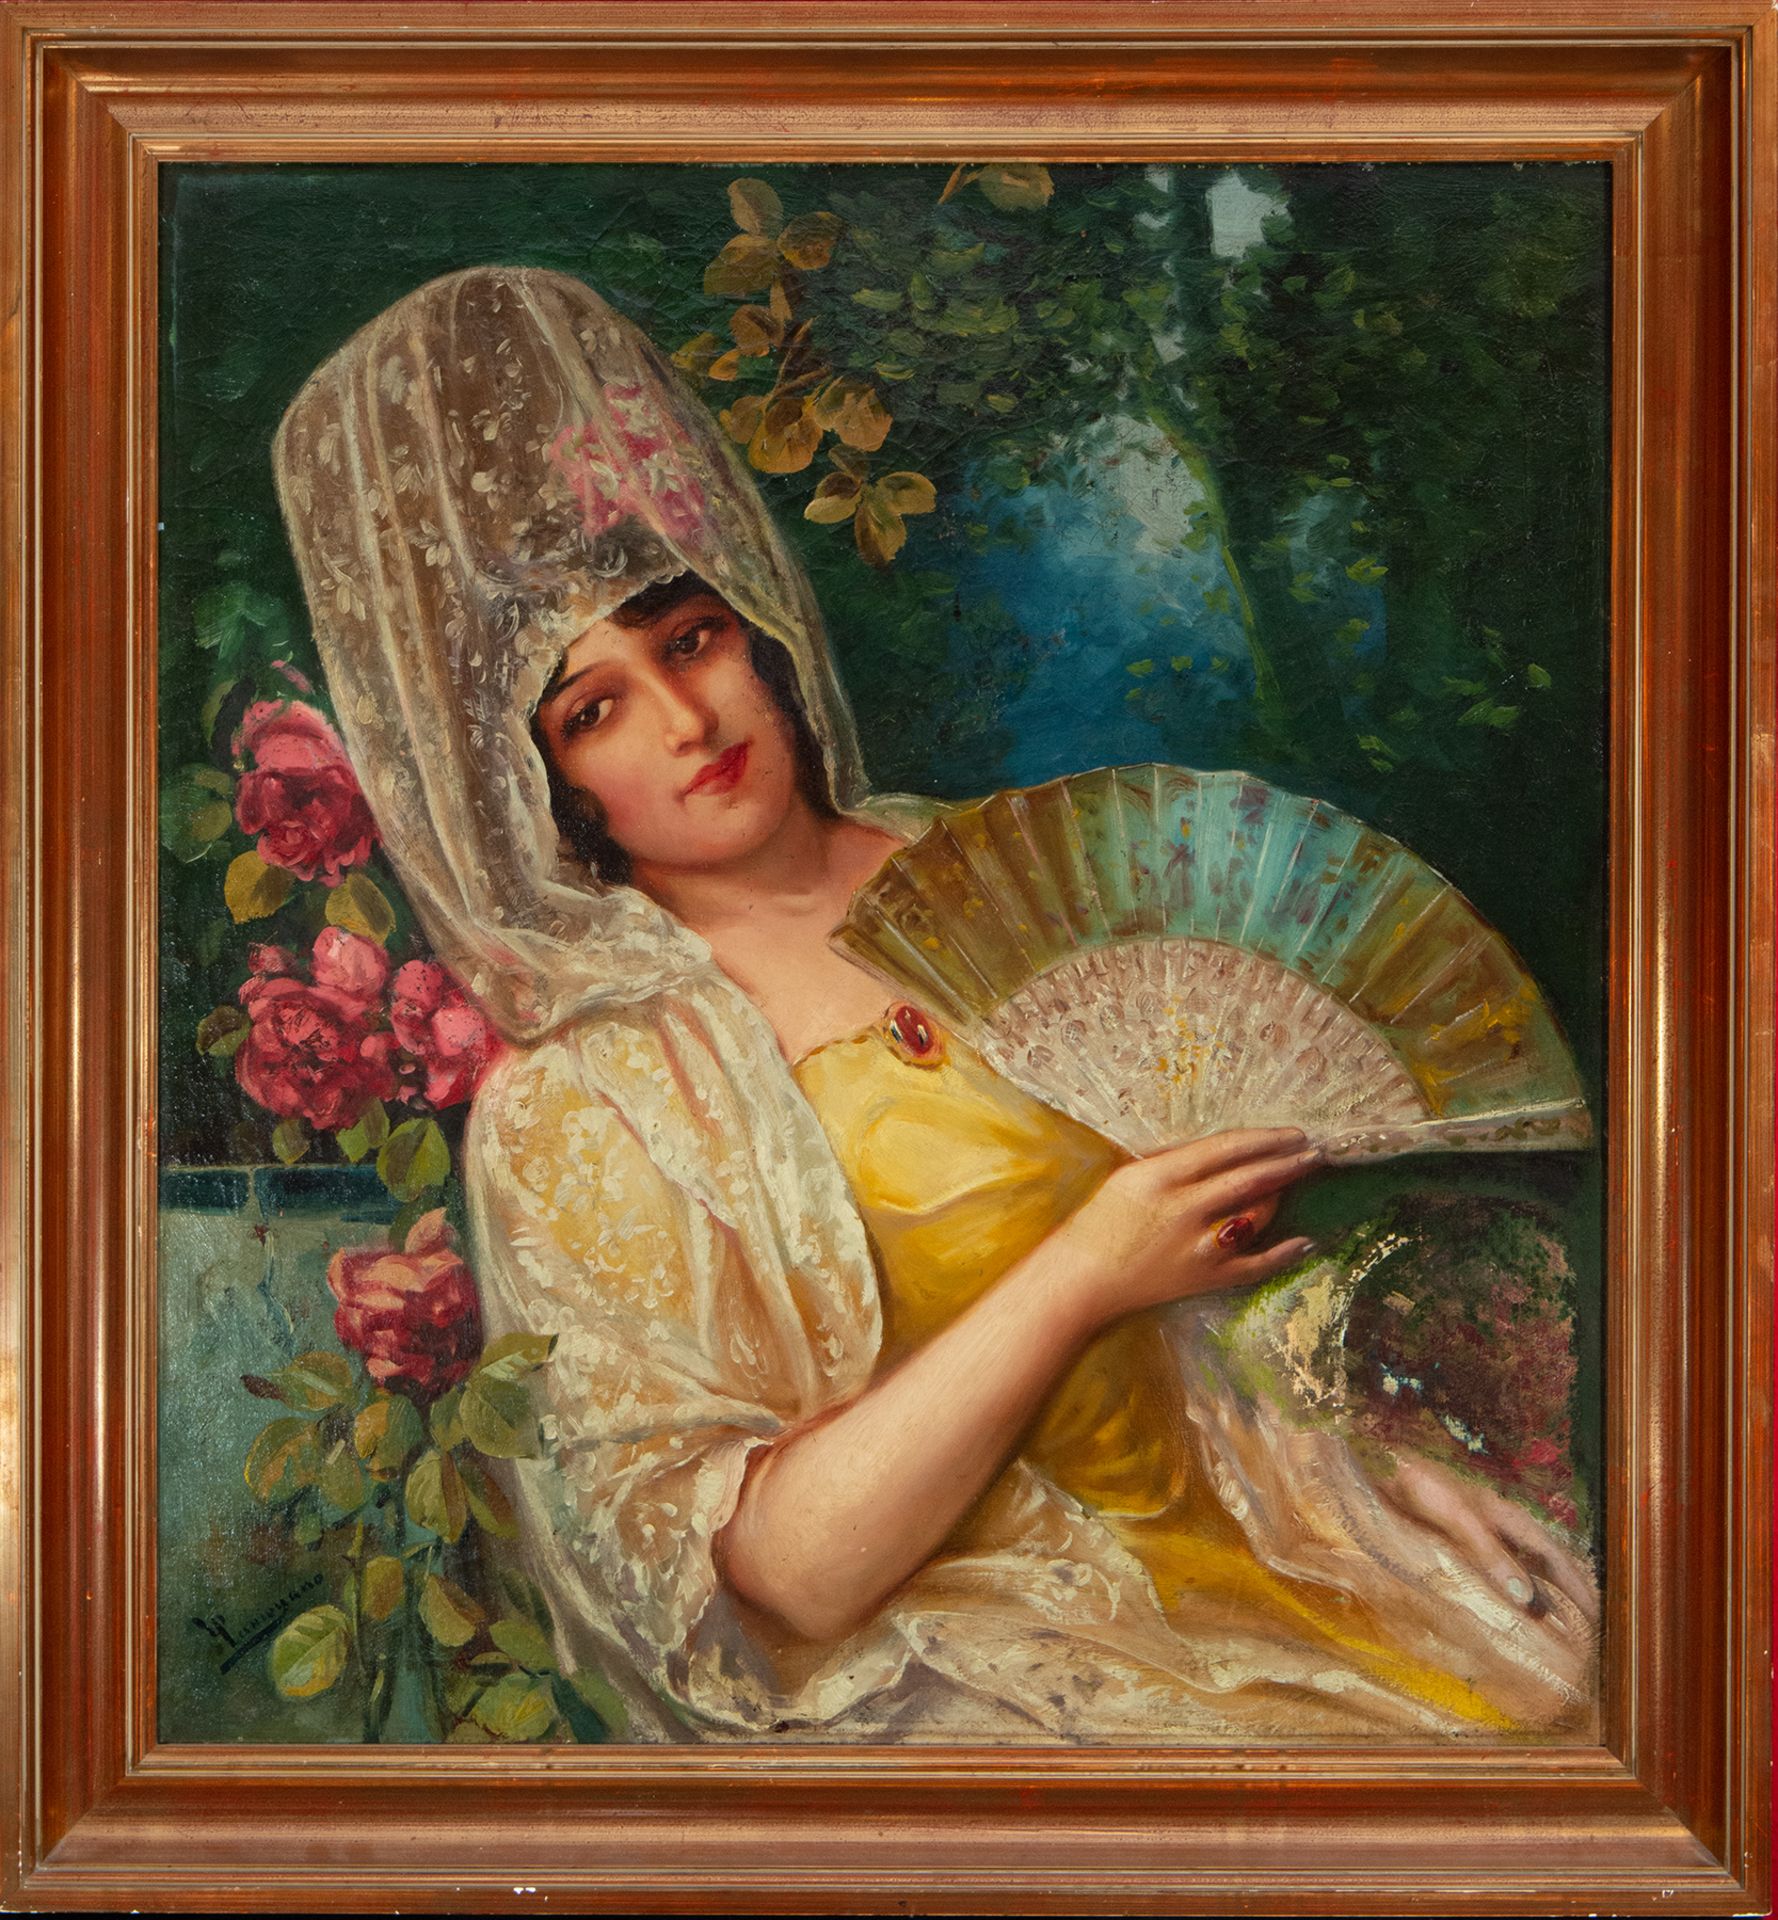 Lady with a Fan, Italian school of the early 20th century, signed